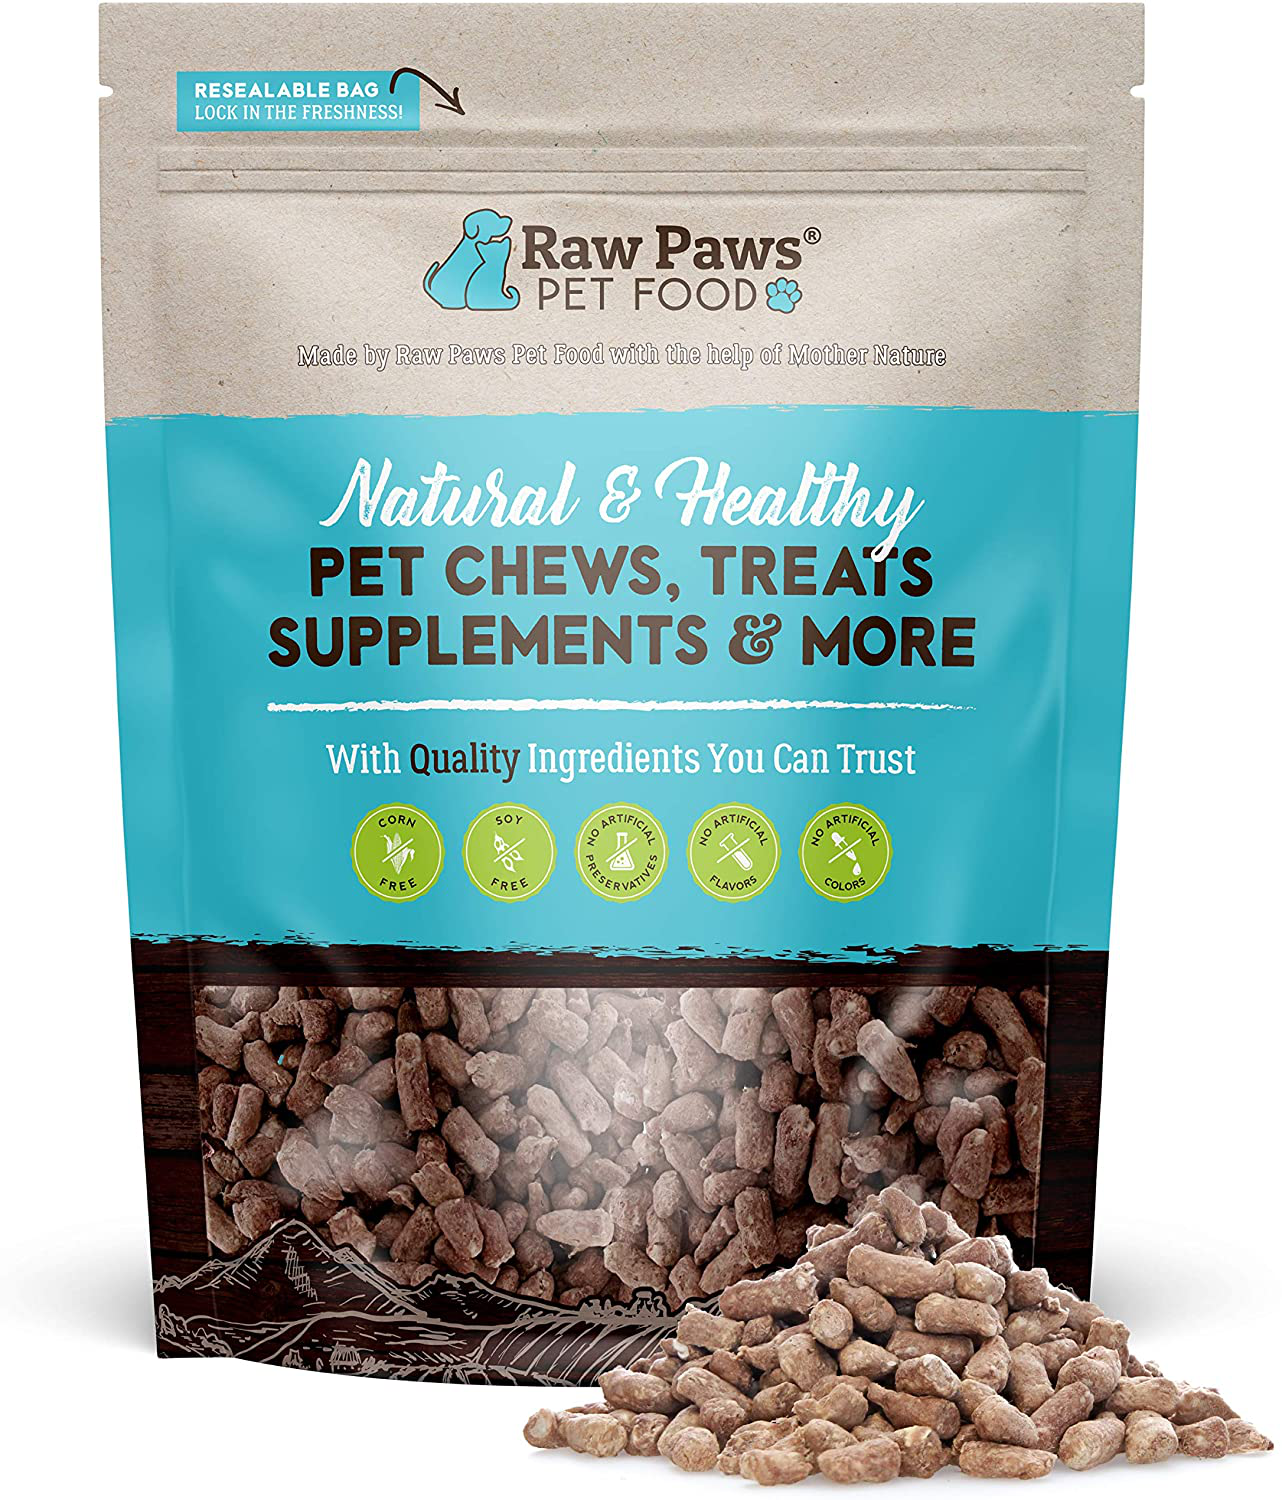 Raw Paws Freeze Dried Raw Ferret Food, Beef 16-Oz - Made in USA - Premium, Grain Free Ferret Diet for Small, Adult, Senior & Baby Ferrets - Also Use as Natural Ferret Treats for Rewarding & Training